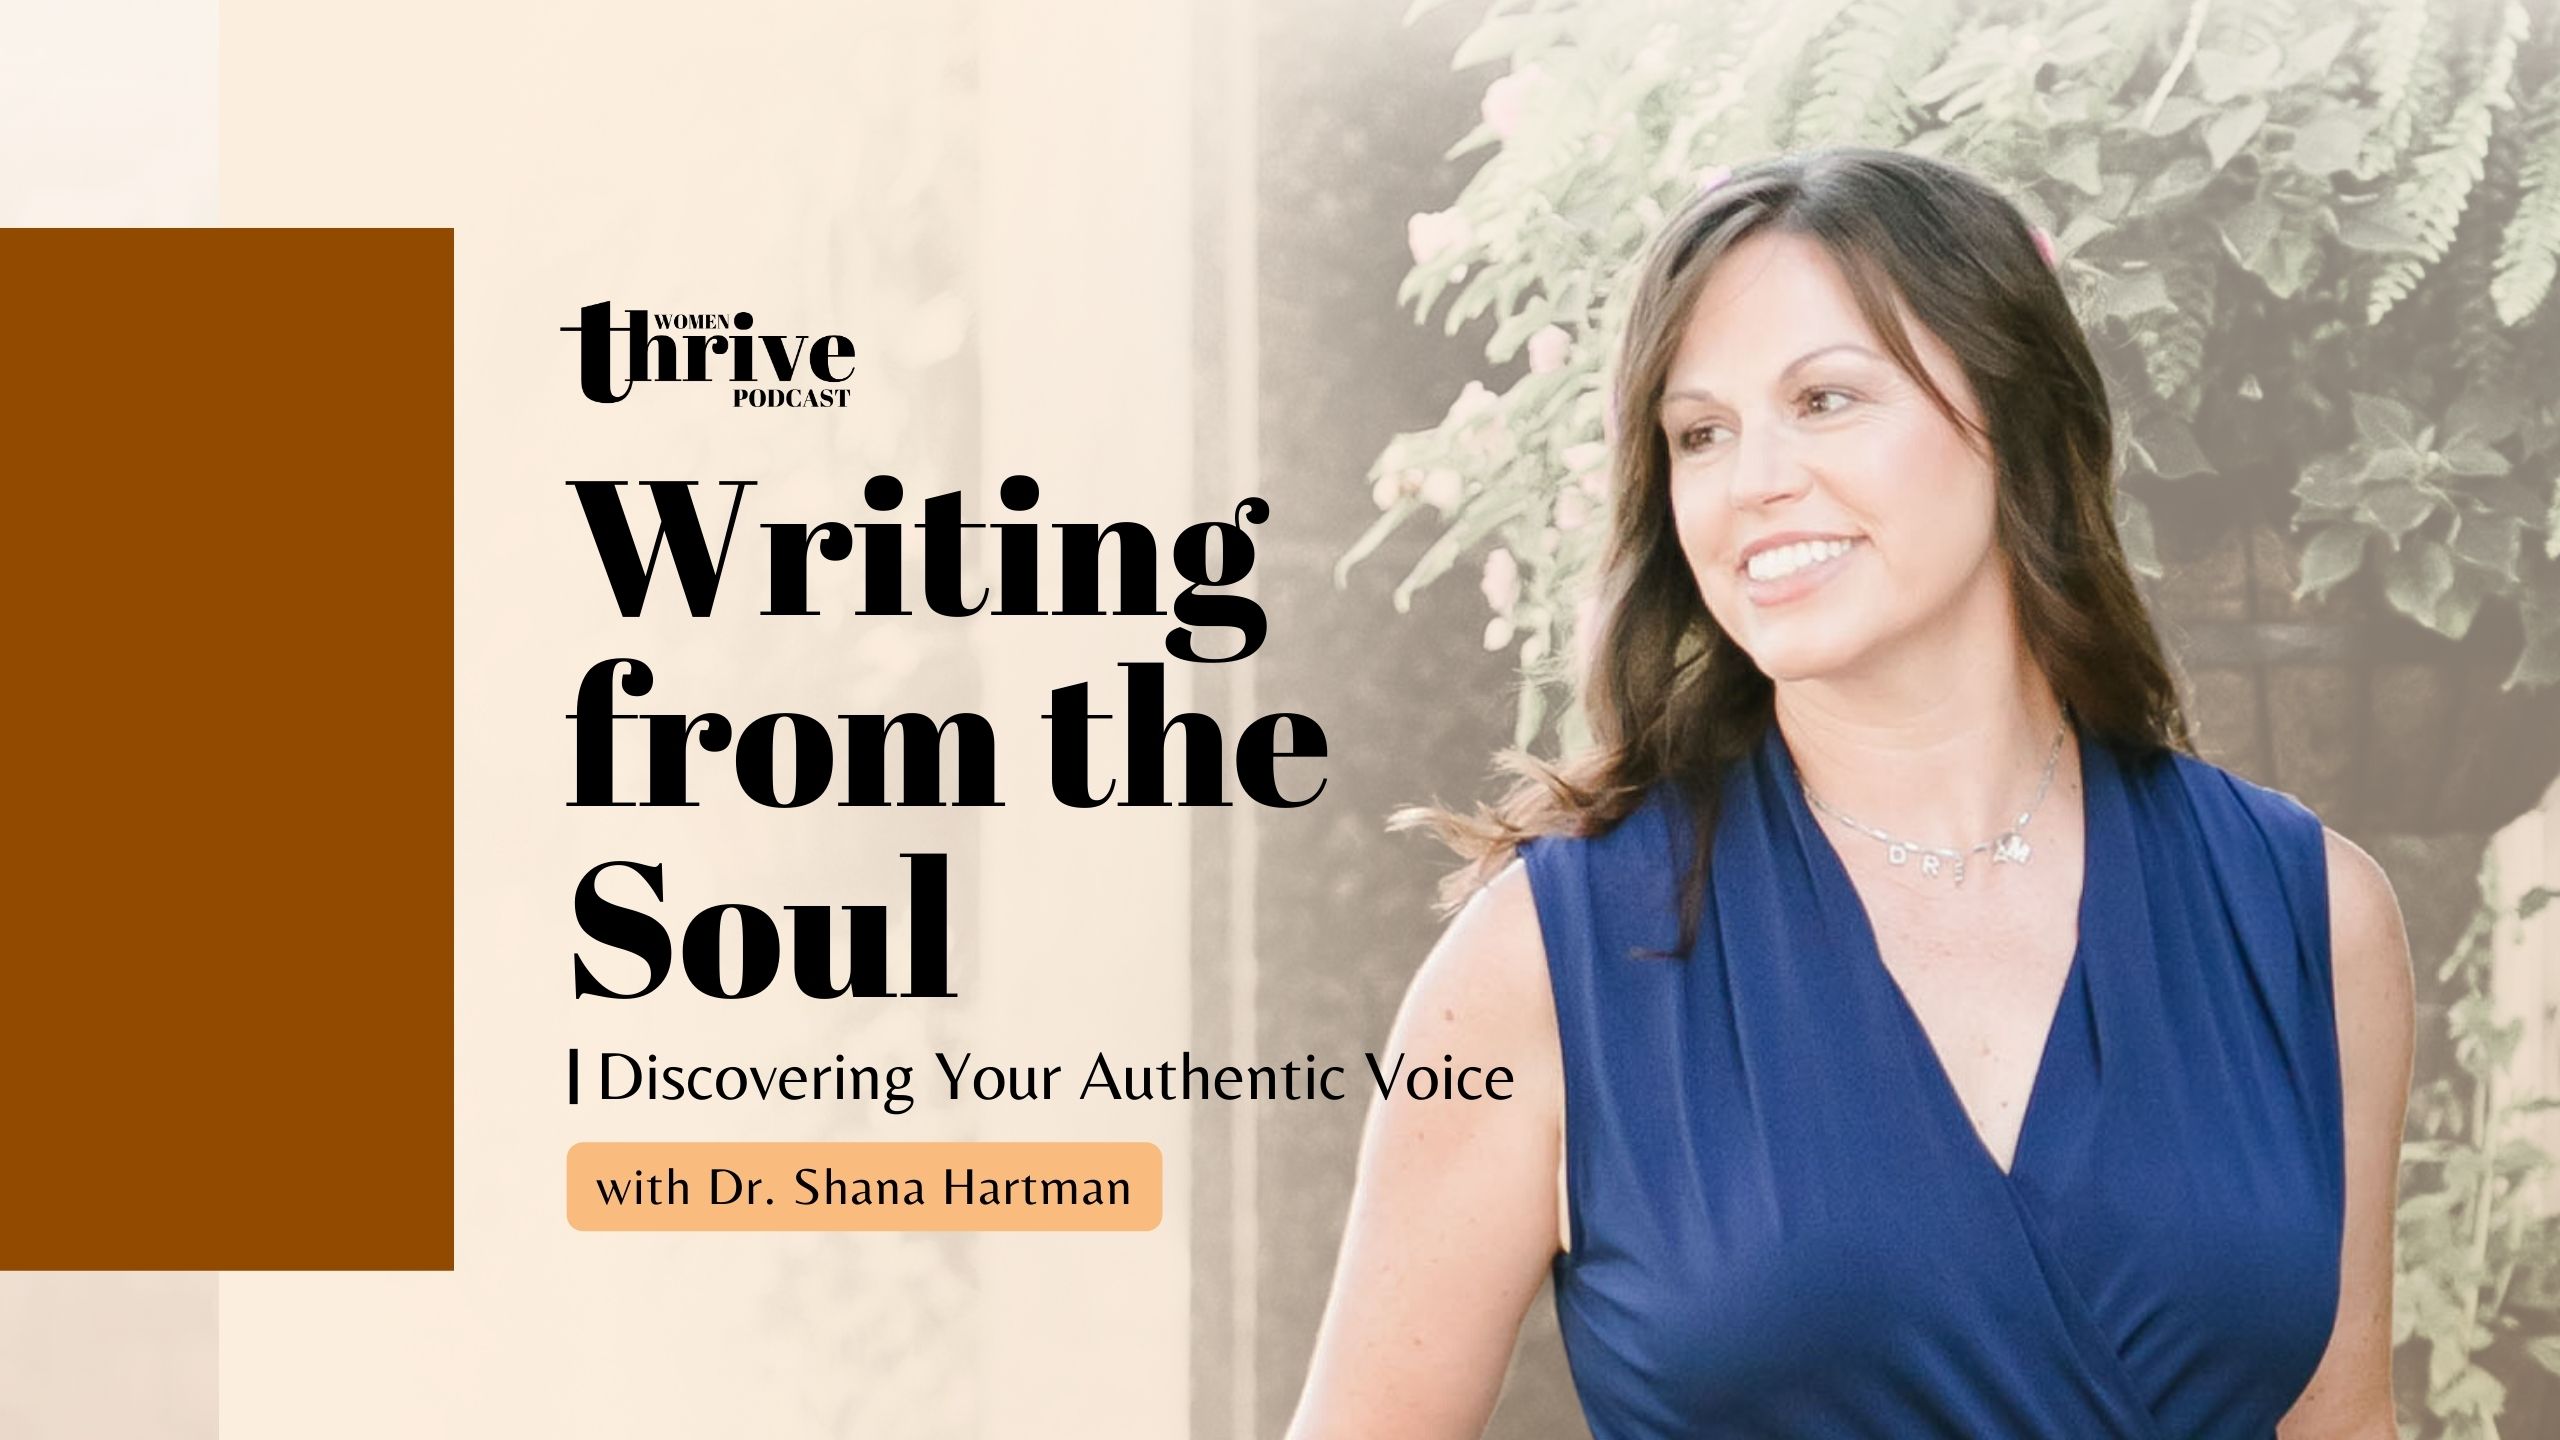 Writing from the Soul with Dr. Shana Hartman